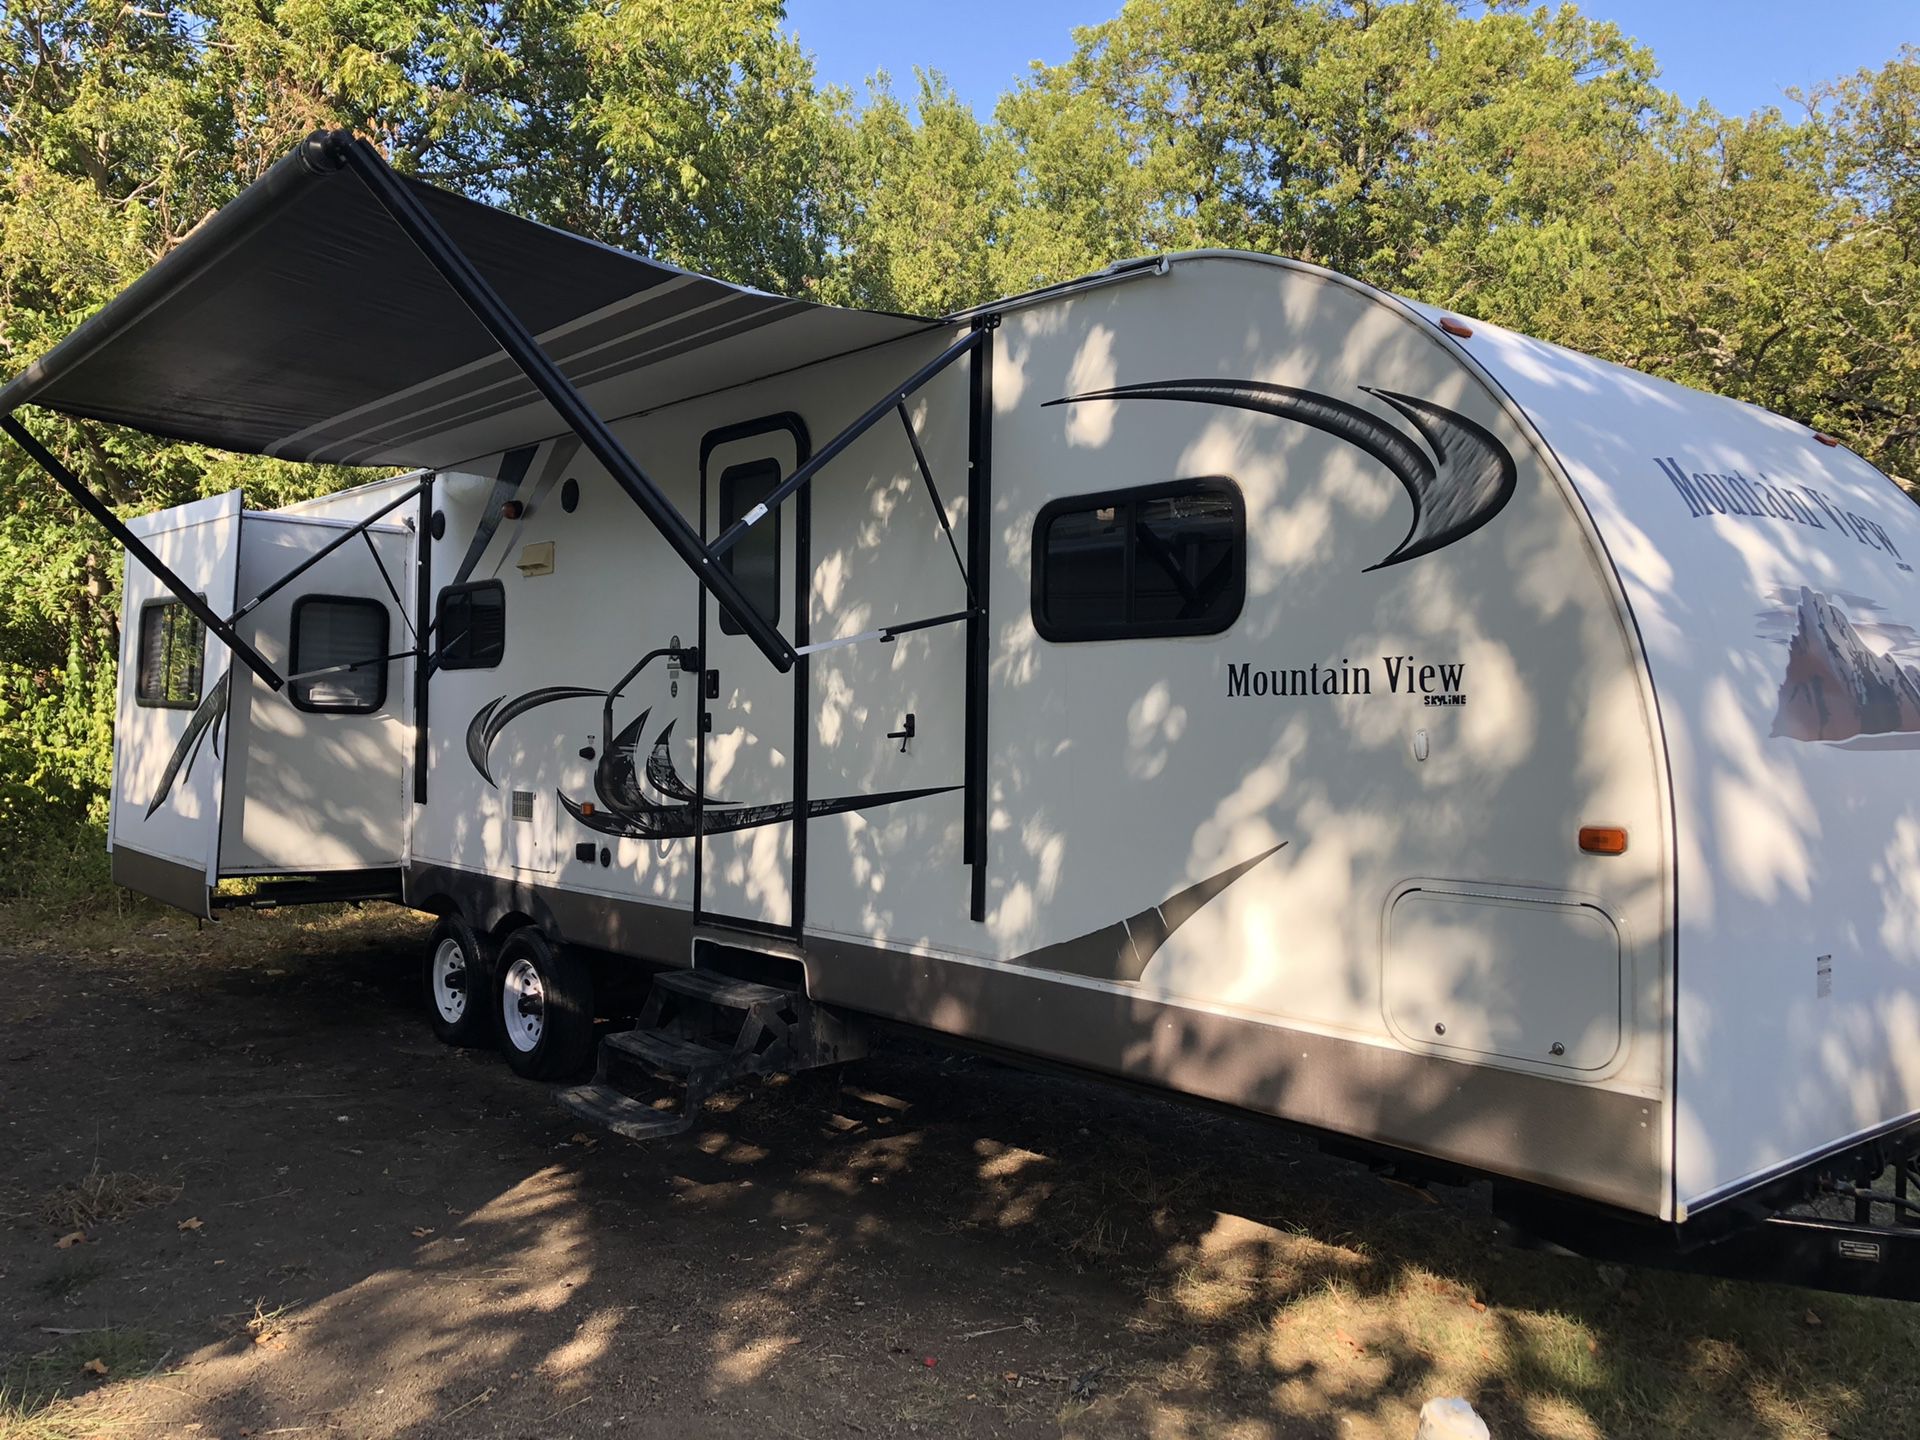 2012 Mountain View 2 slide out 34feet bumper bull travel trailer Fully self contained sleeps 6 AC in heat Fridge raider Stove Stand up shower Powe